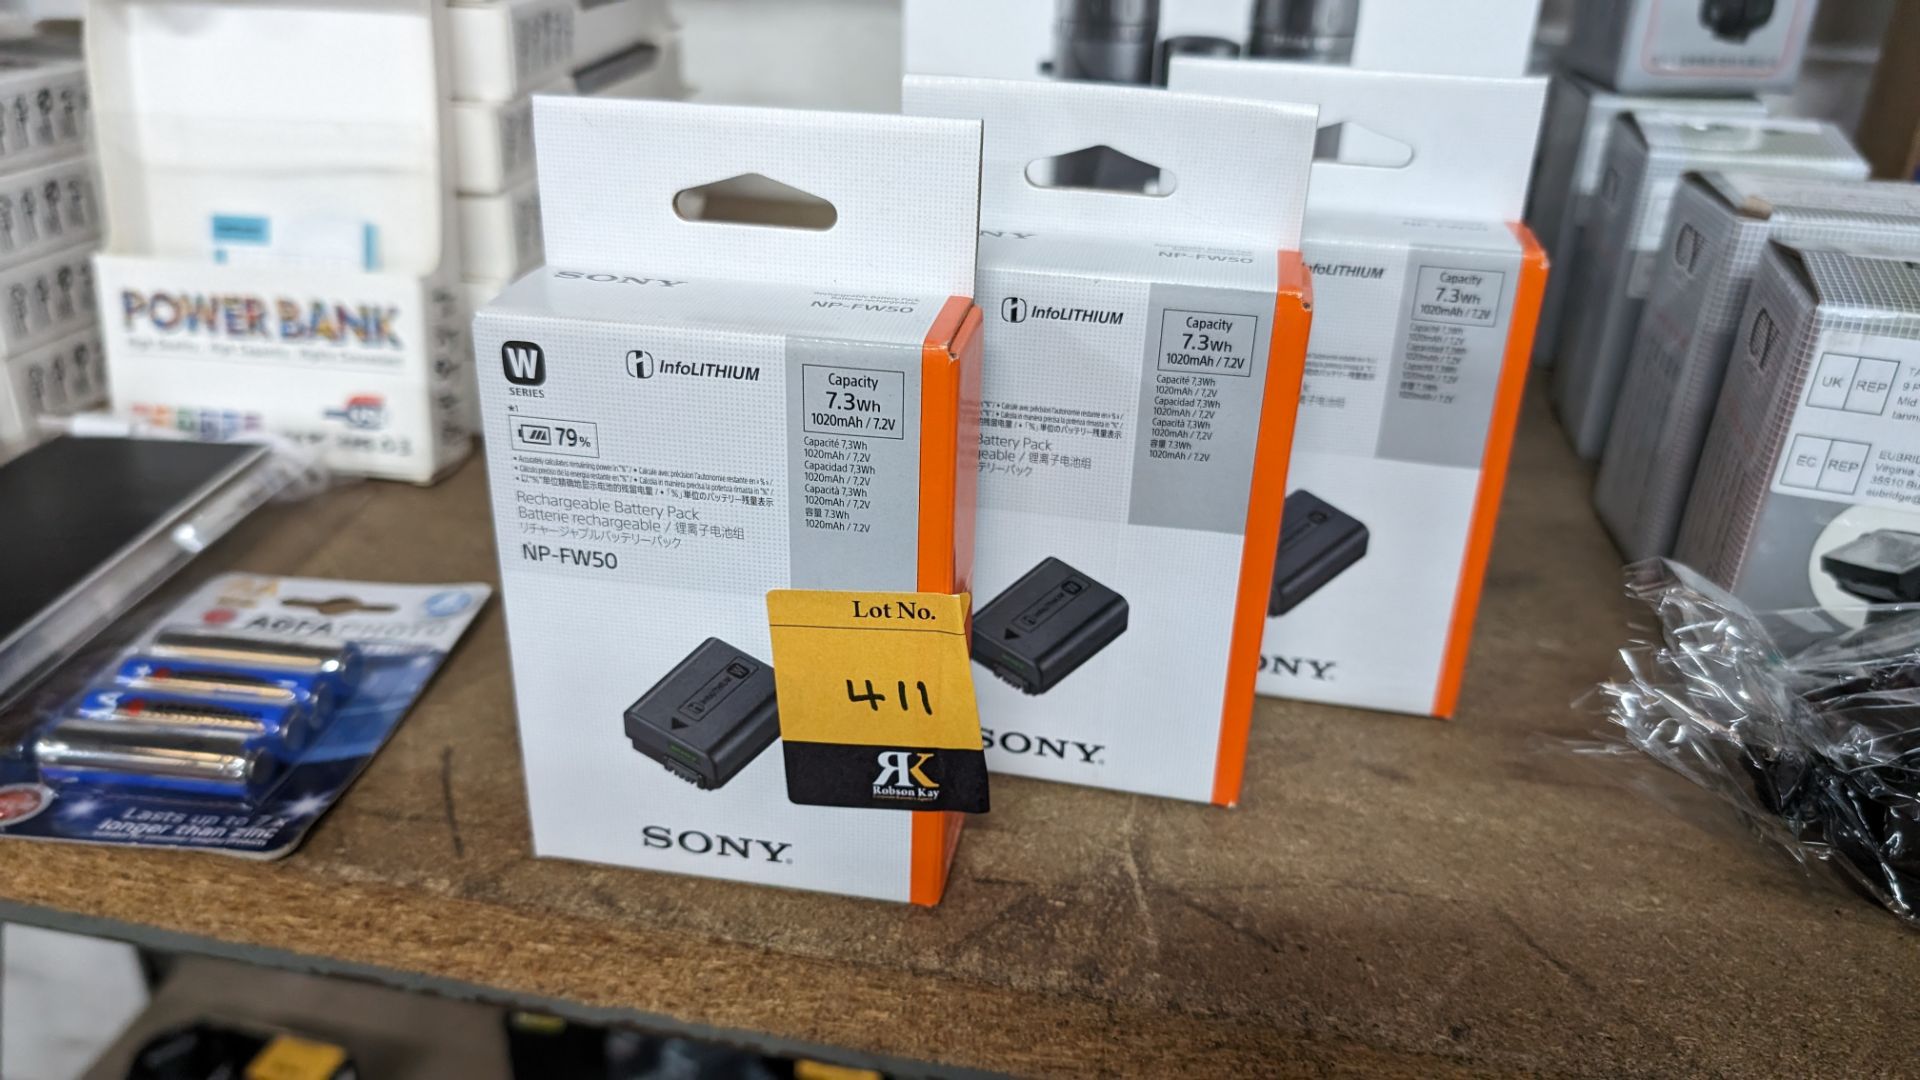 3 off Sony model NP-FW50 batteries